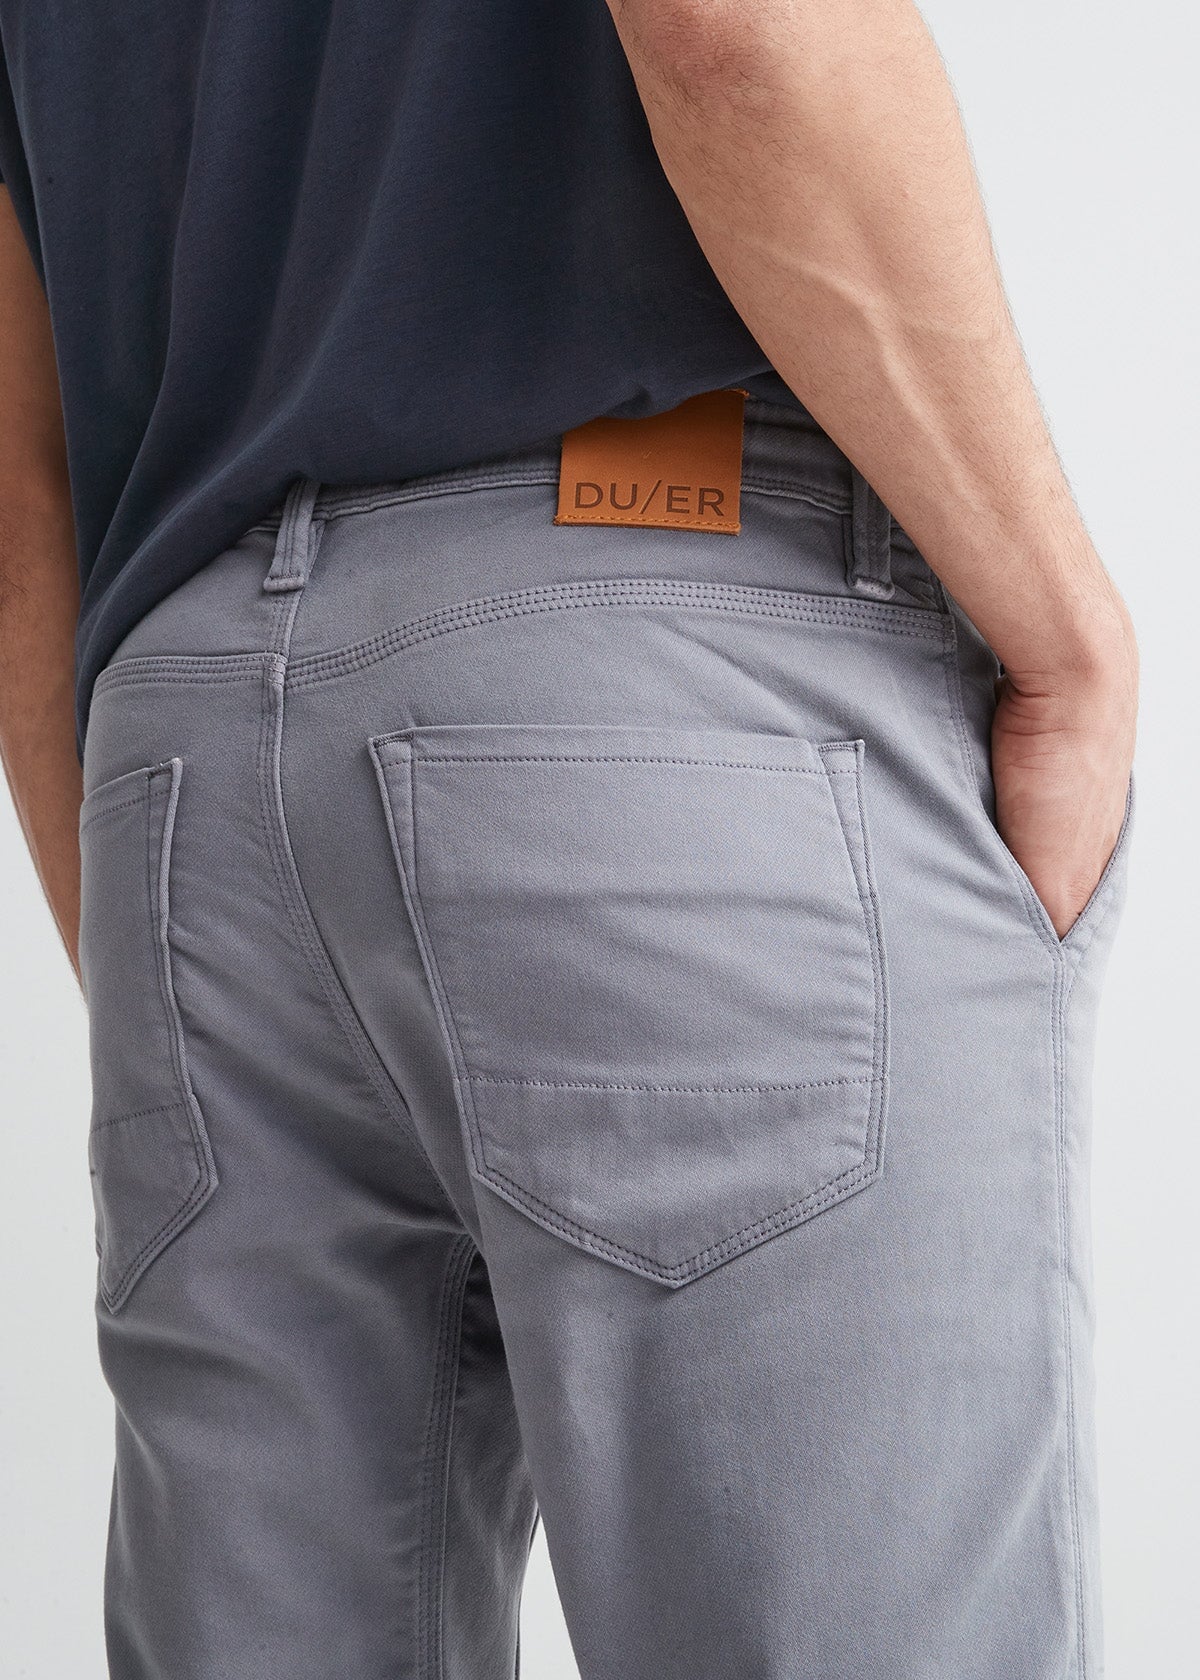 Men's Joggers With Side Hip Pockets